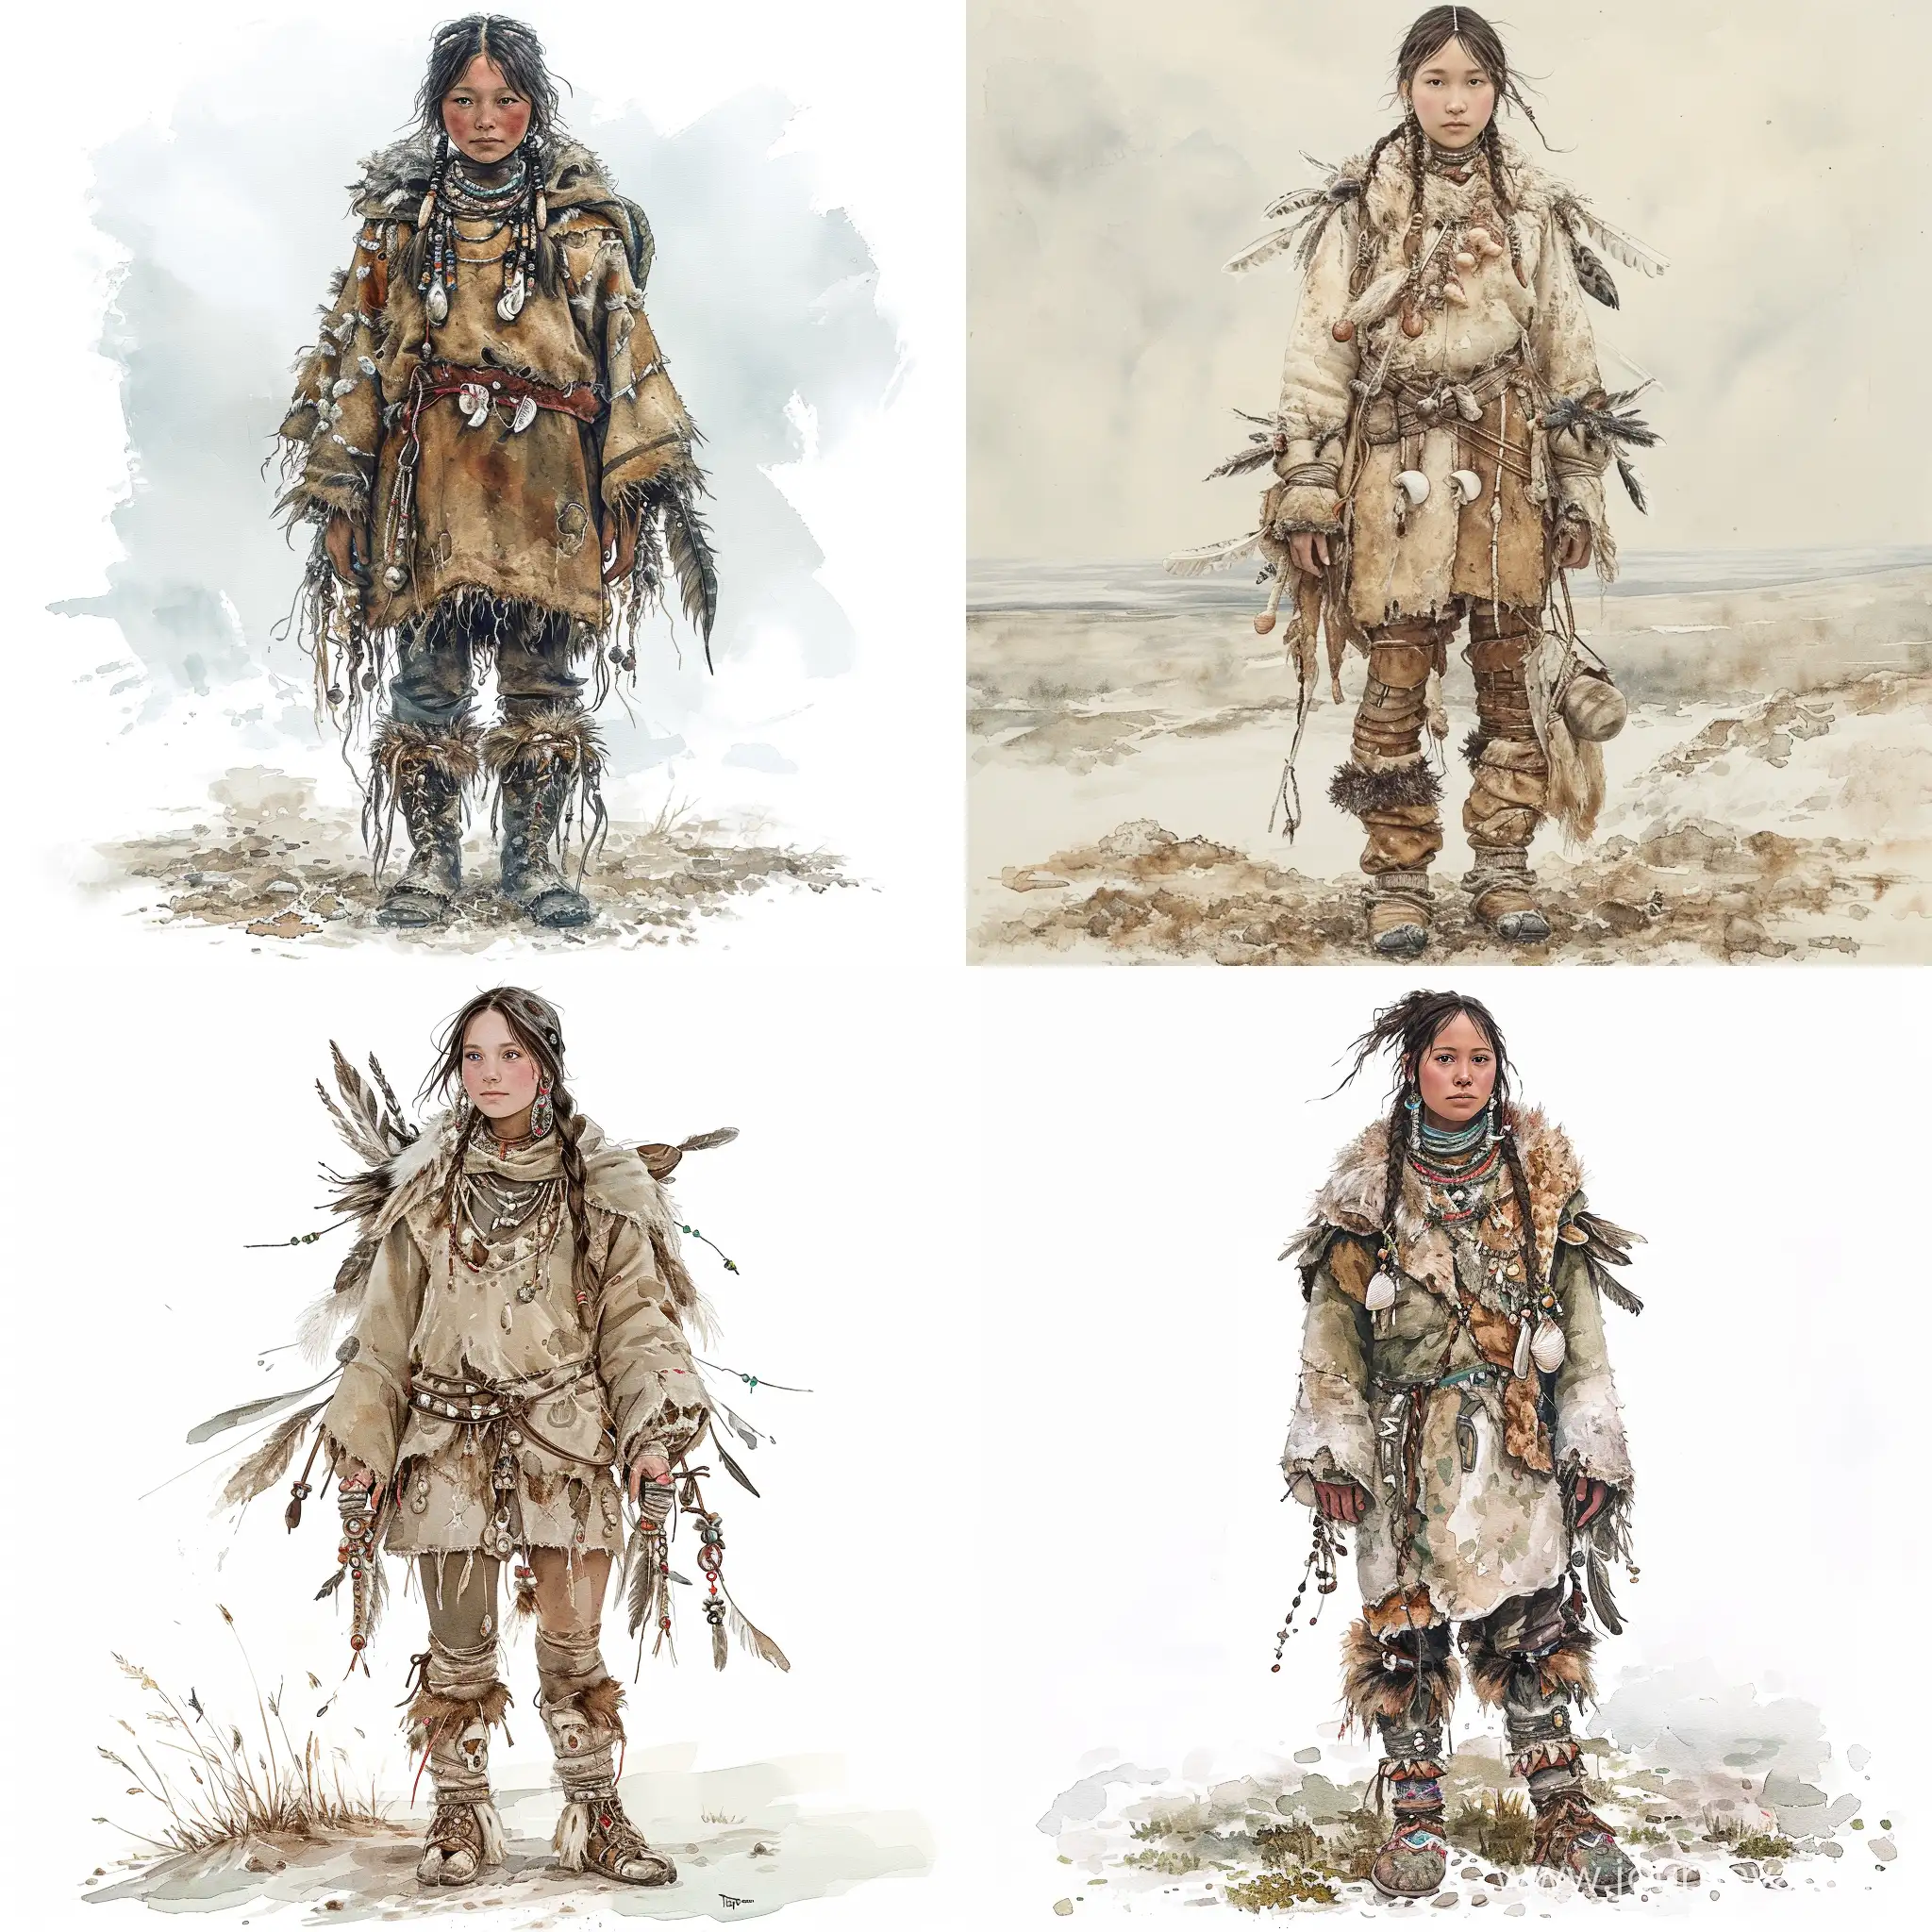 Full body Illustration of an inuit woman, young, 18 years old, beautiful, native american phenotype, wearing stone age clothing made from natural fabrics like linen, cotton, or furs, adorned with feathers, beads and shells, stading on the steppe tundra landscape, watercolors, gloomy and depressing ambient, artwork by tom björklund